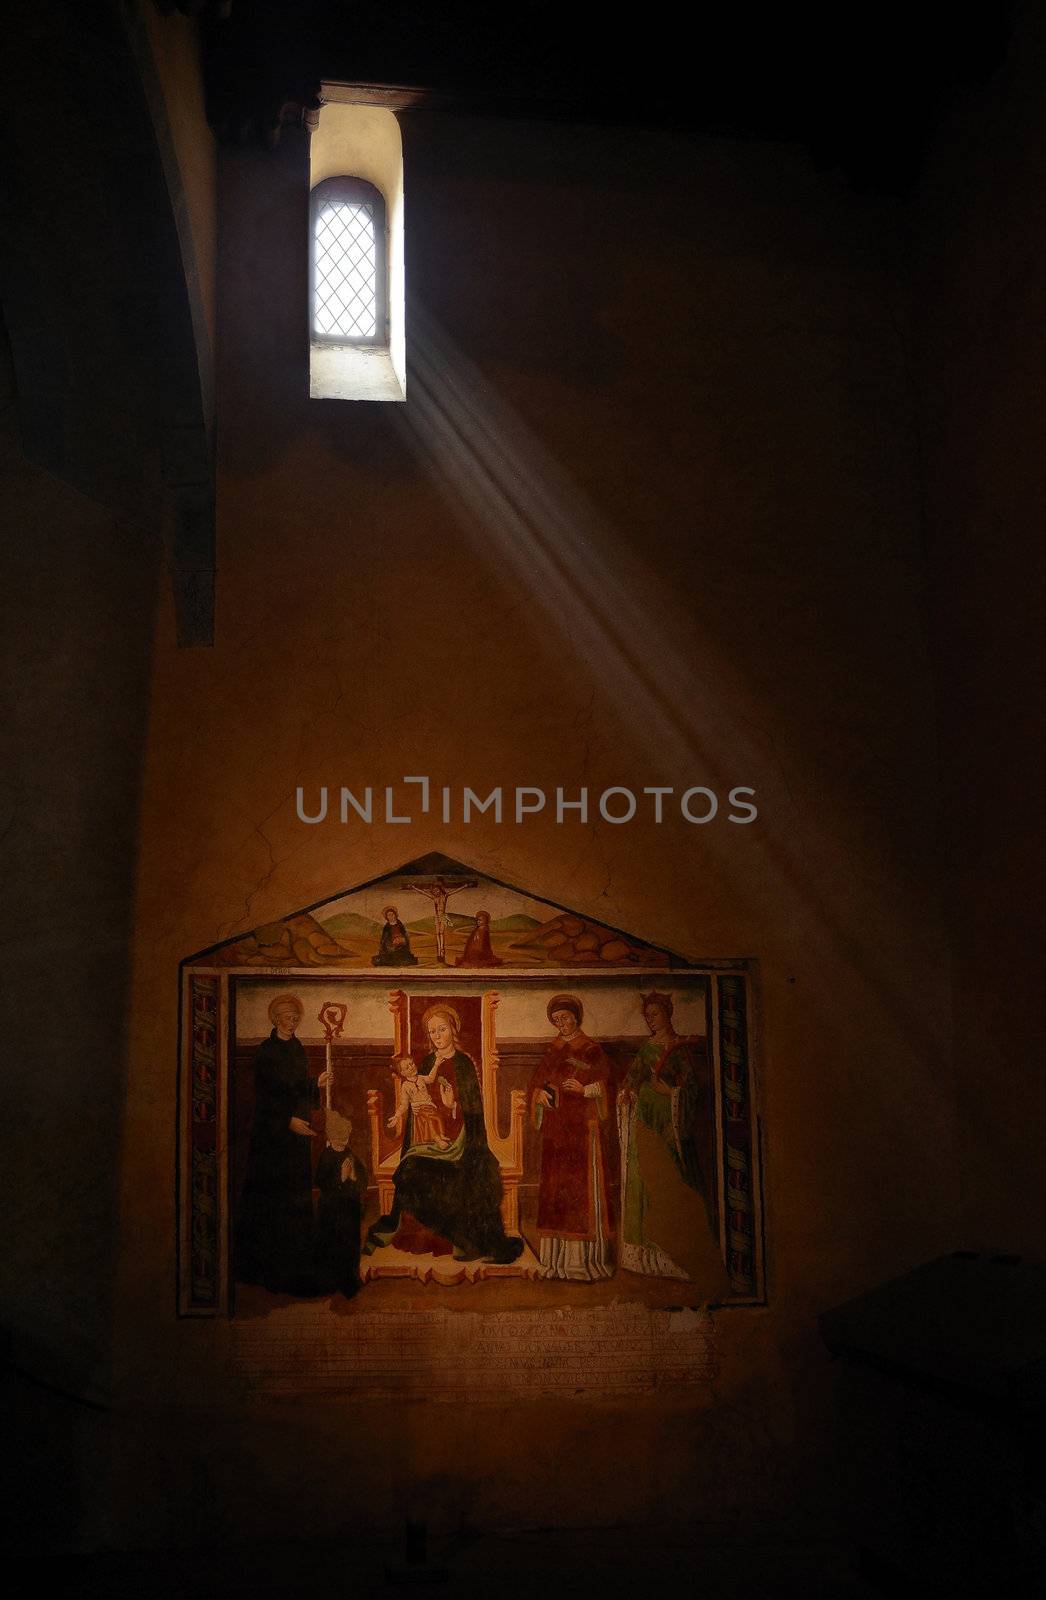 Church interior - Fresco religious painting under a beam of light from a small window